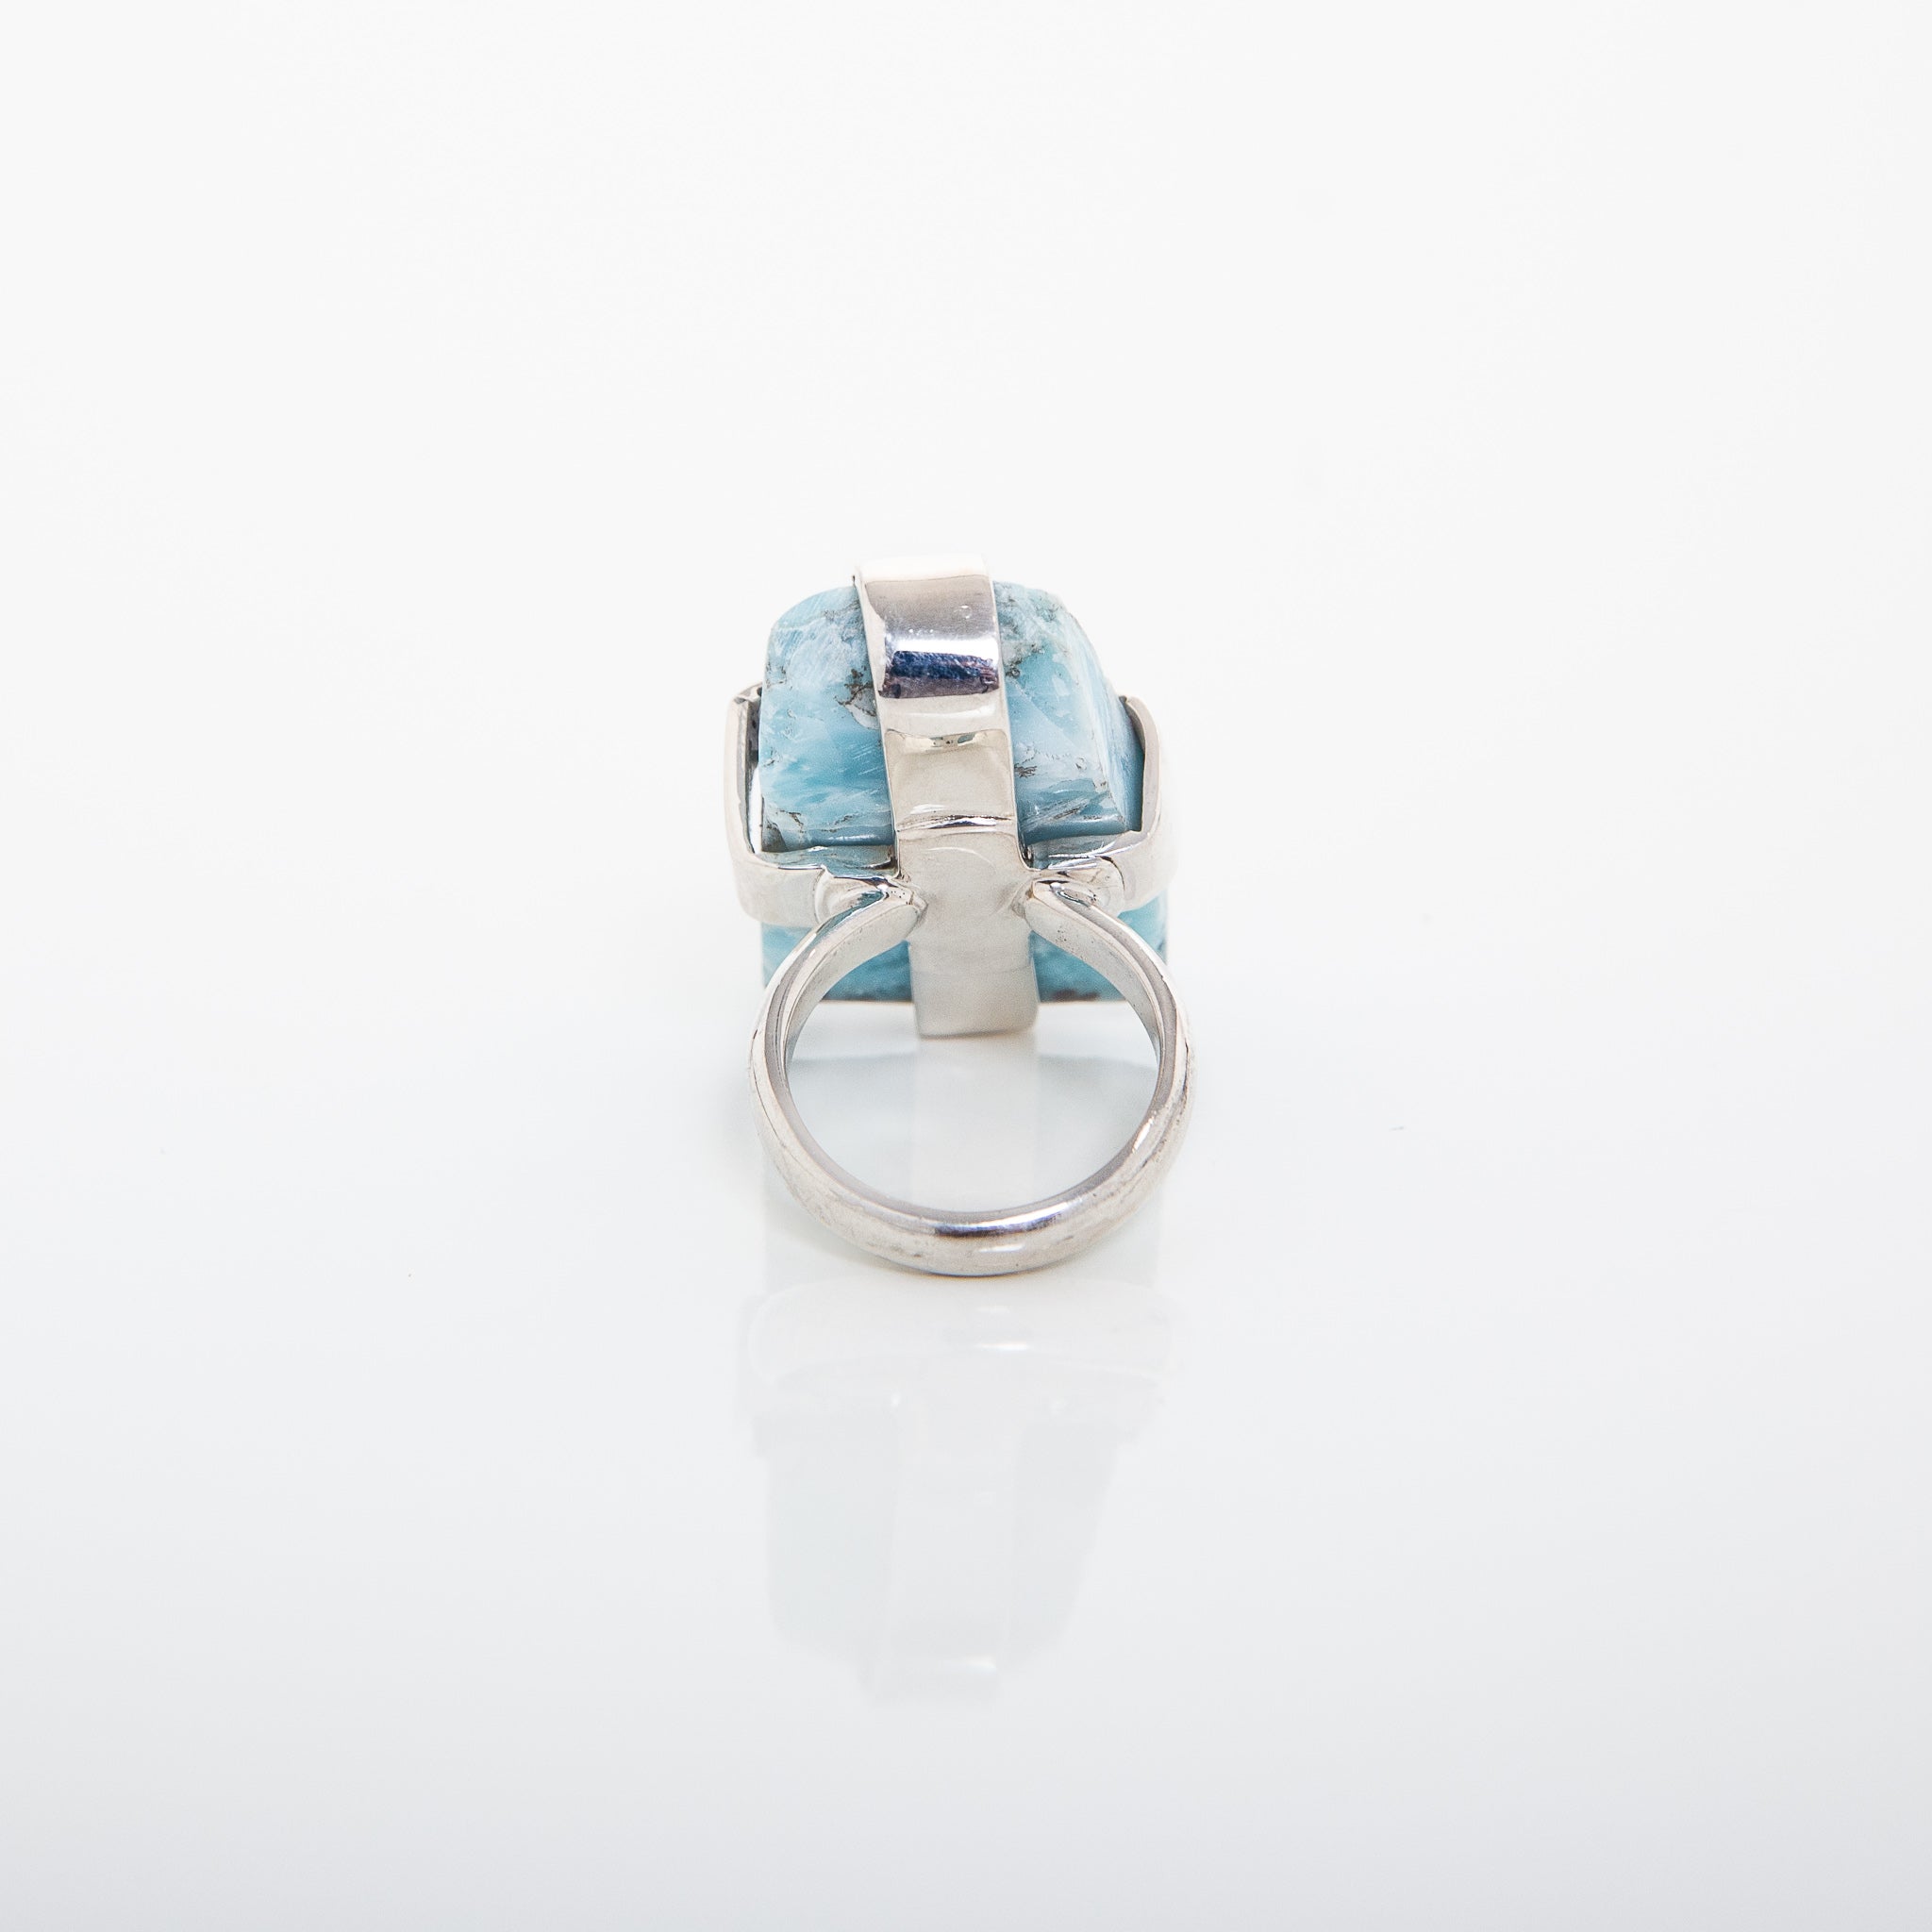 Rough Larimar stone Ring Xime handmade by The Larimar Shop in the Dominican Republic.